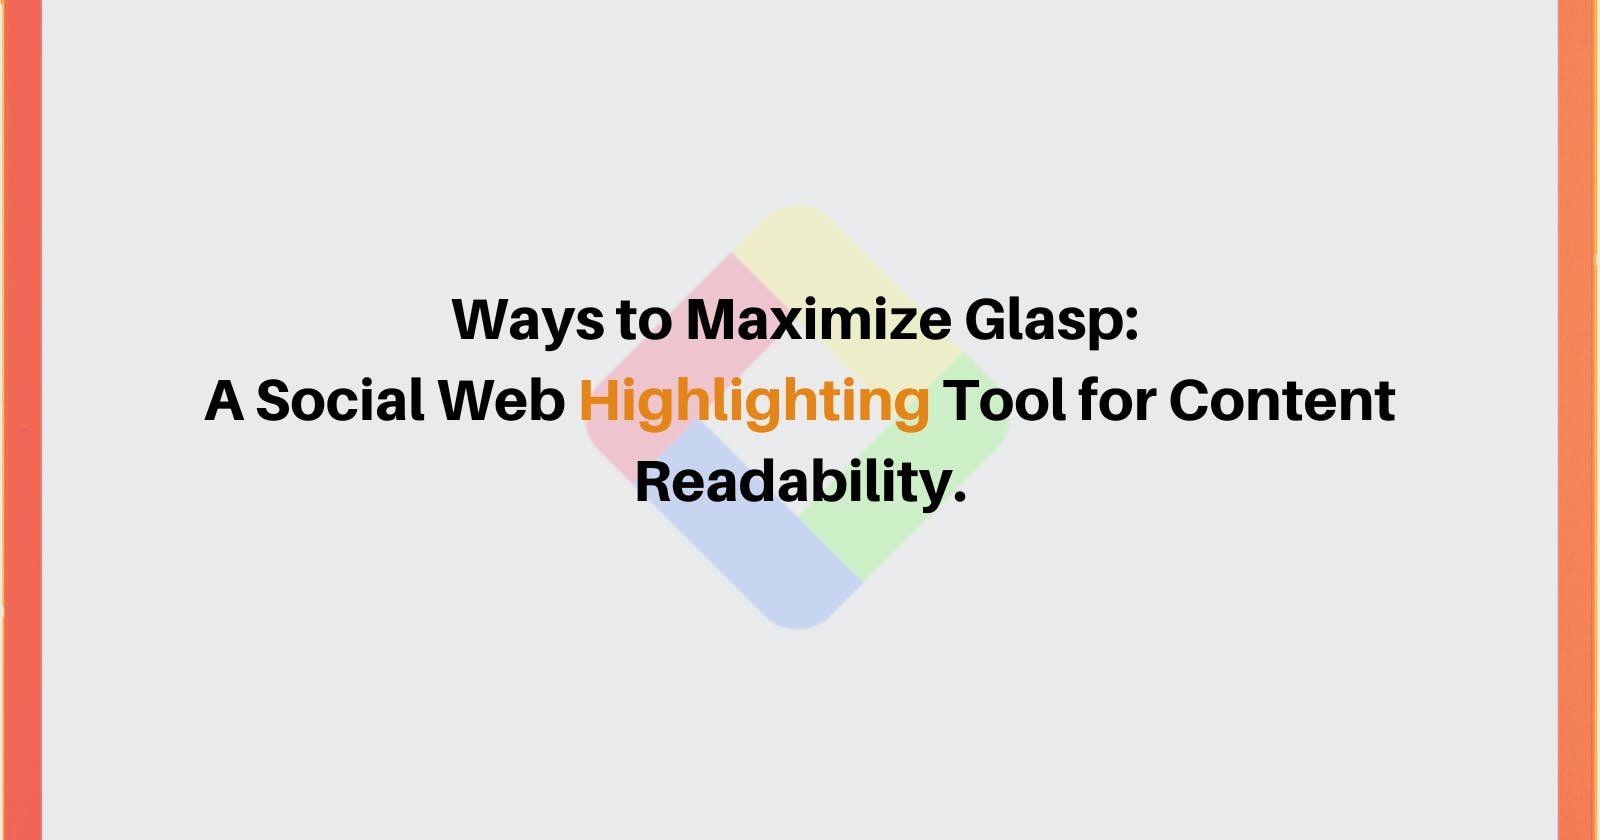 Ways to Maximize Glasp: A Social Web Highlighting Tool for Content Readability.